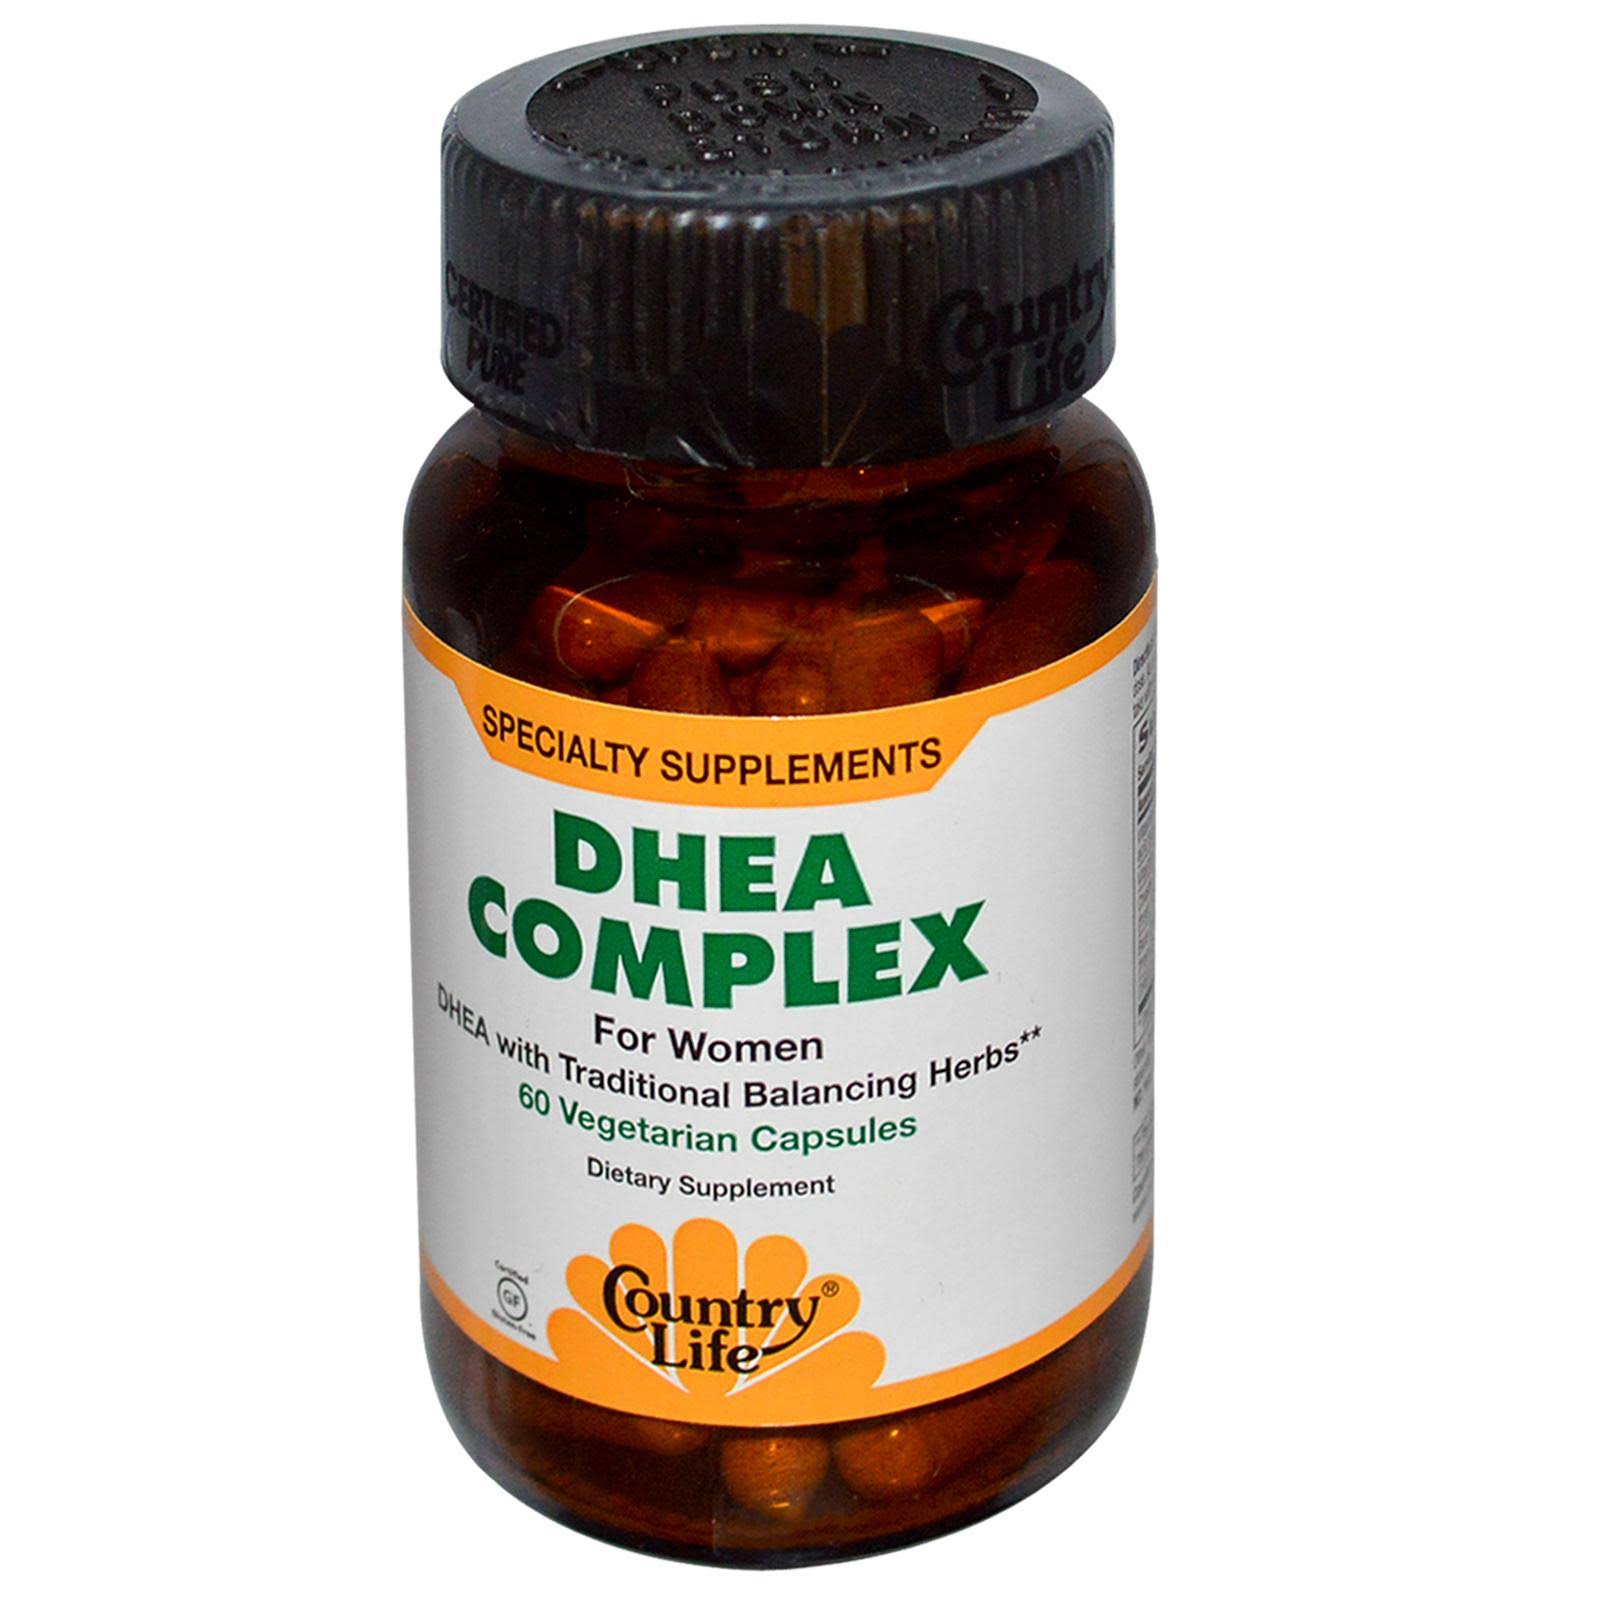 Country Life Dhea Complex For Women - 60 Vegan Capsules